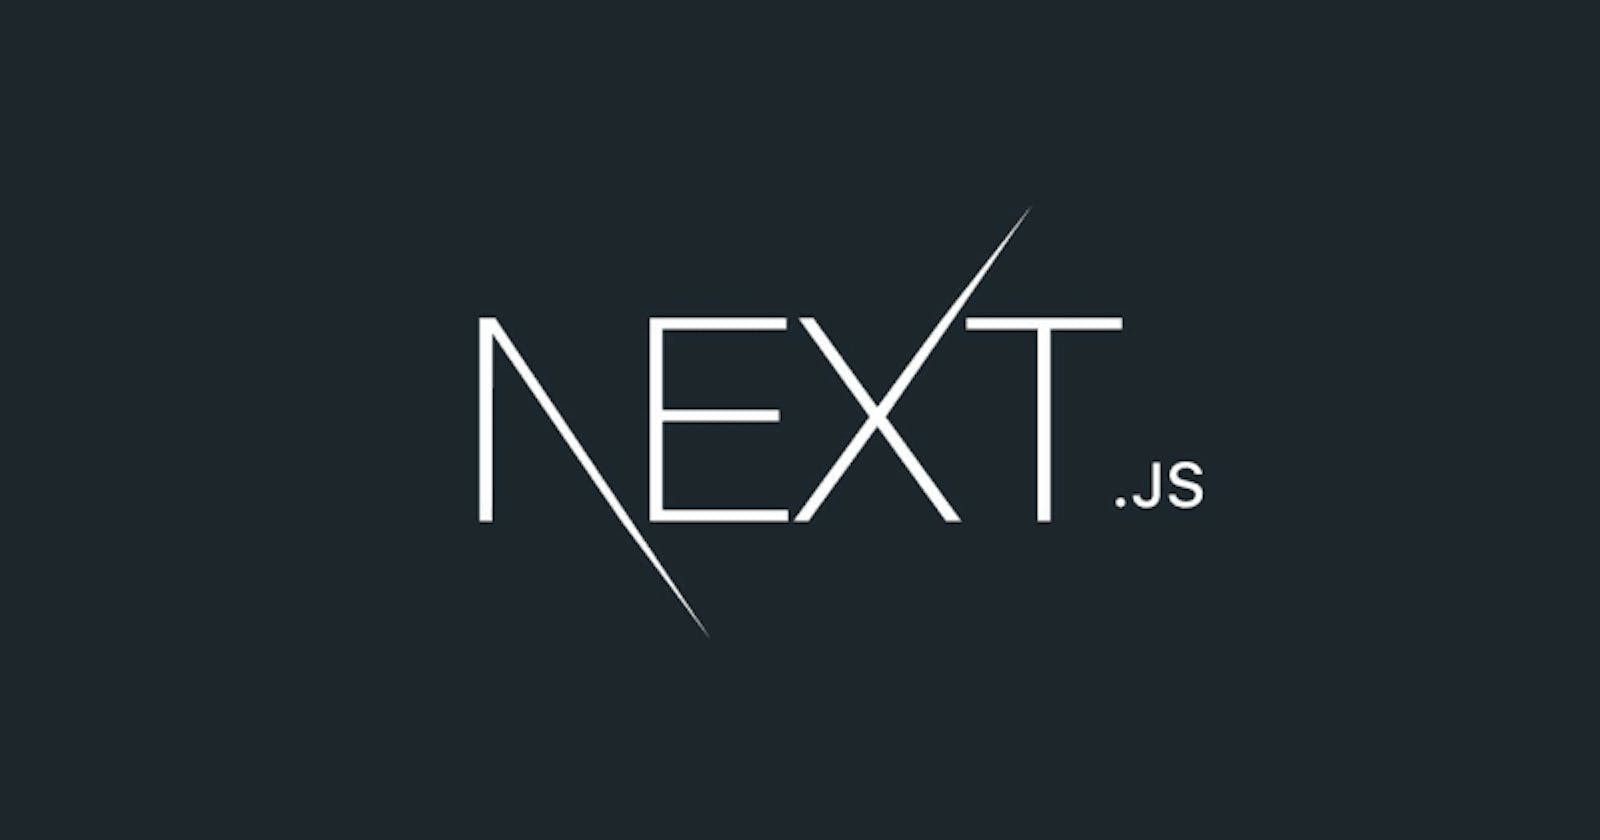 How to make a Custom Error page in Next.js